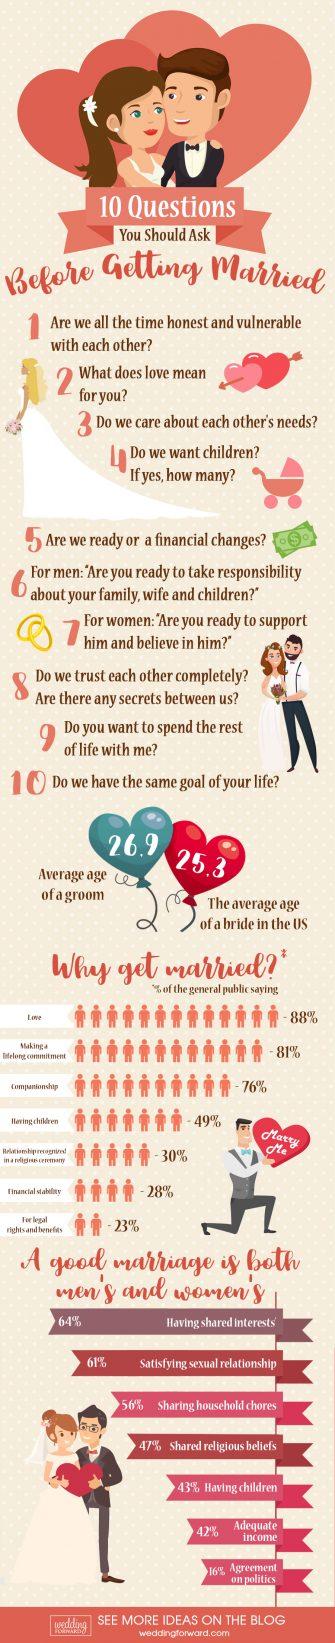 10 Questions You Should Ask Before Getting Married infographic